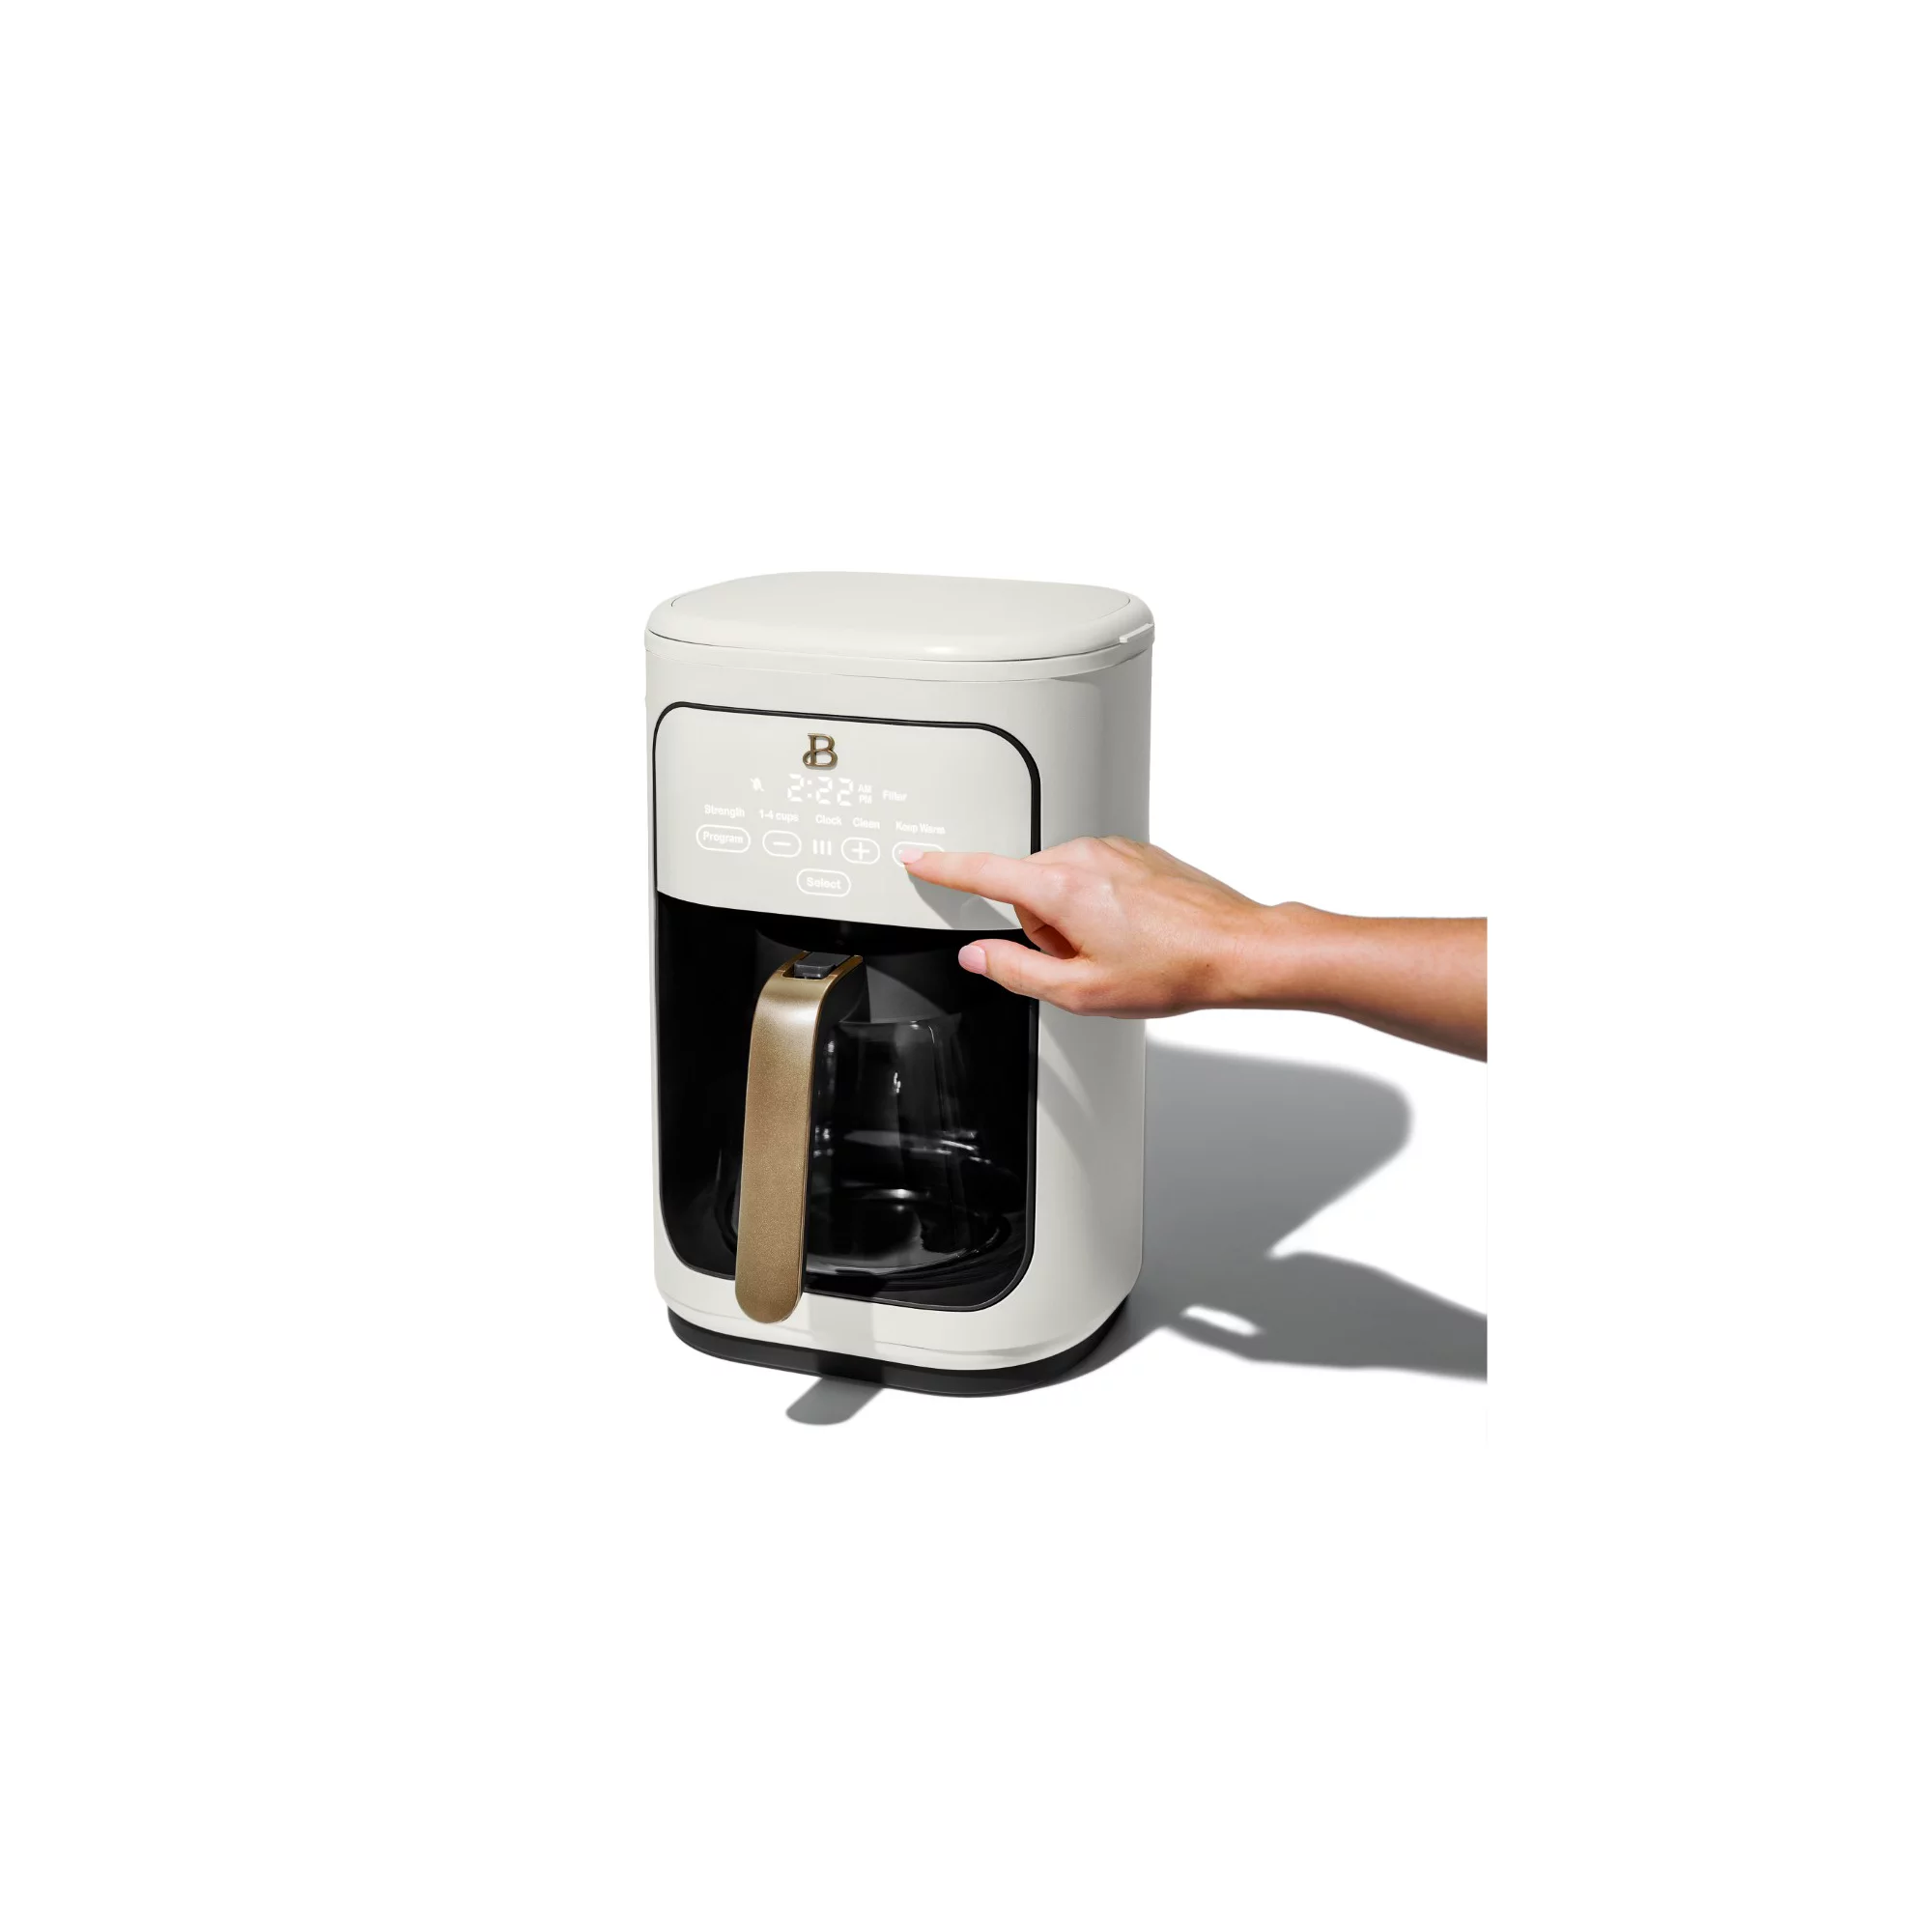 https://discounttoday.net/wp-content/uploads/2023/02/Beautiful-14-Cup-Programmable-Touchscreen-Coffee-Maker-White-Icing-by-Drew-Barrymore-5.webp